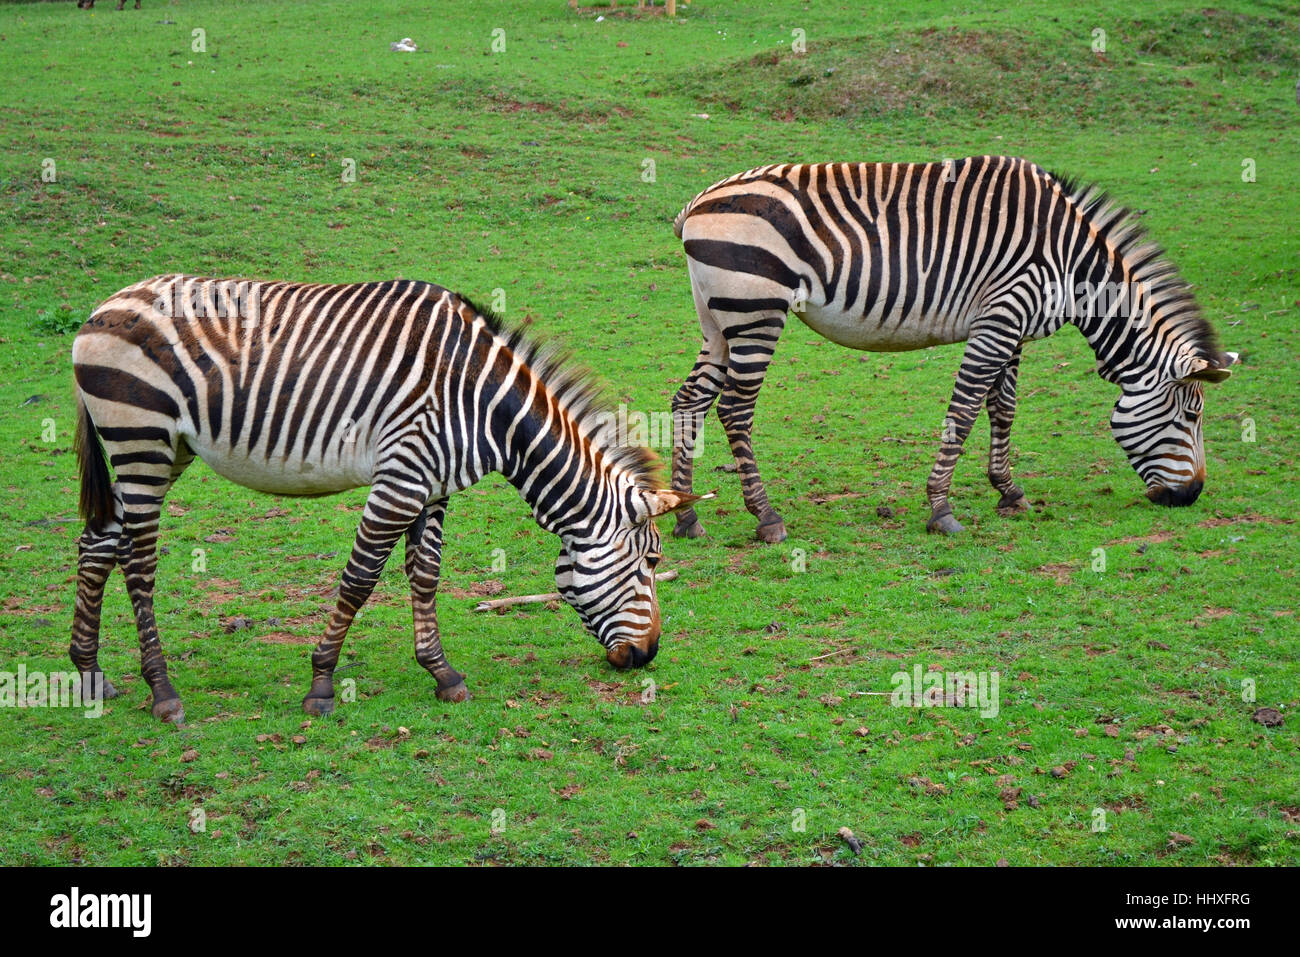 two zebras grazing on the grass at paignton zoo Stock Photo